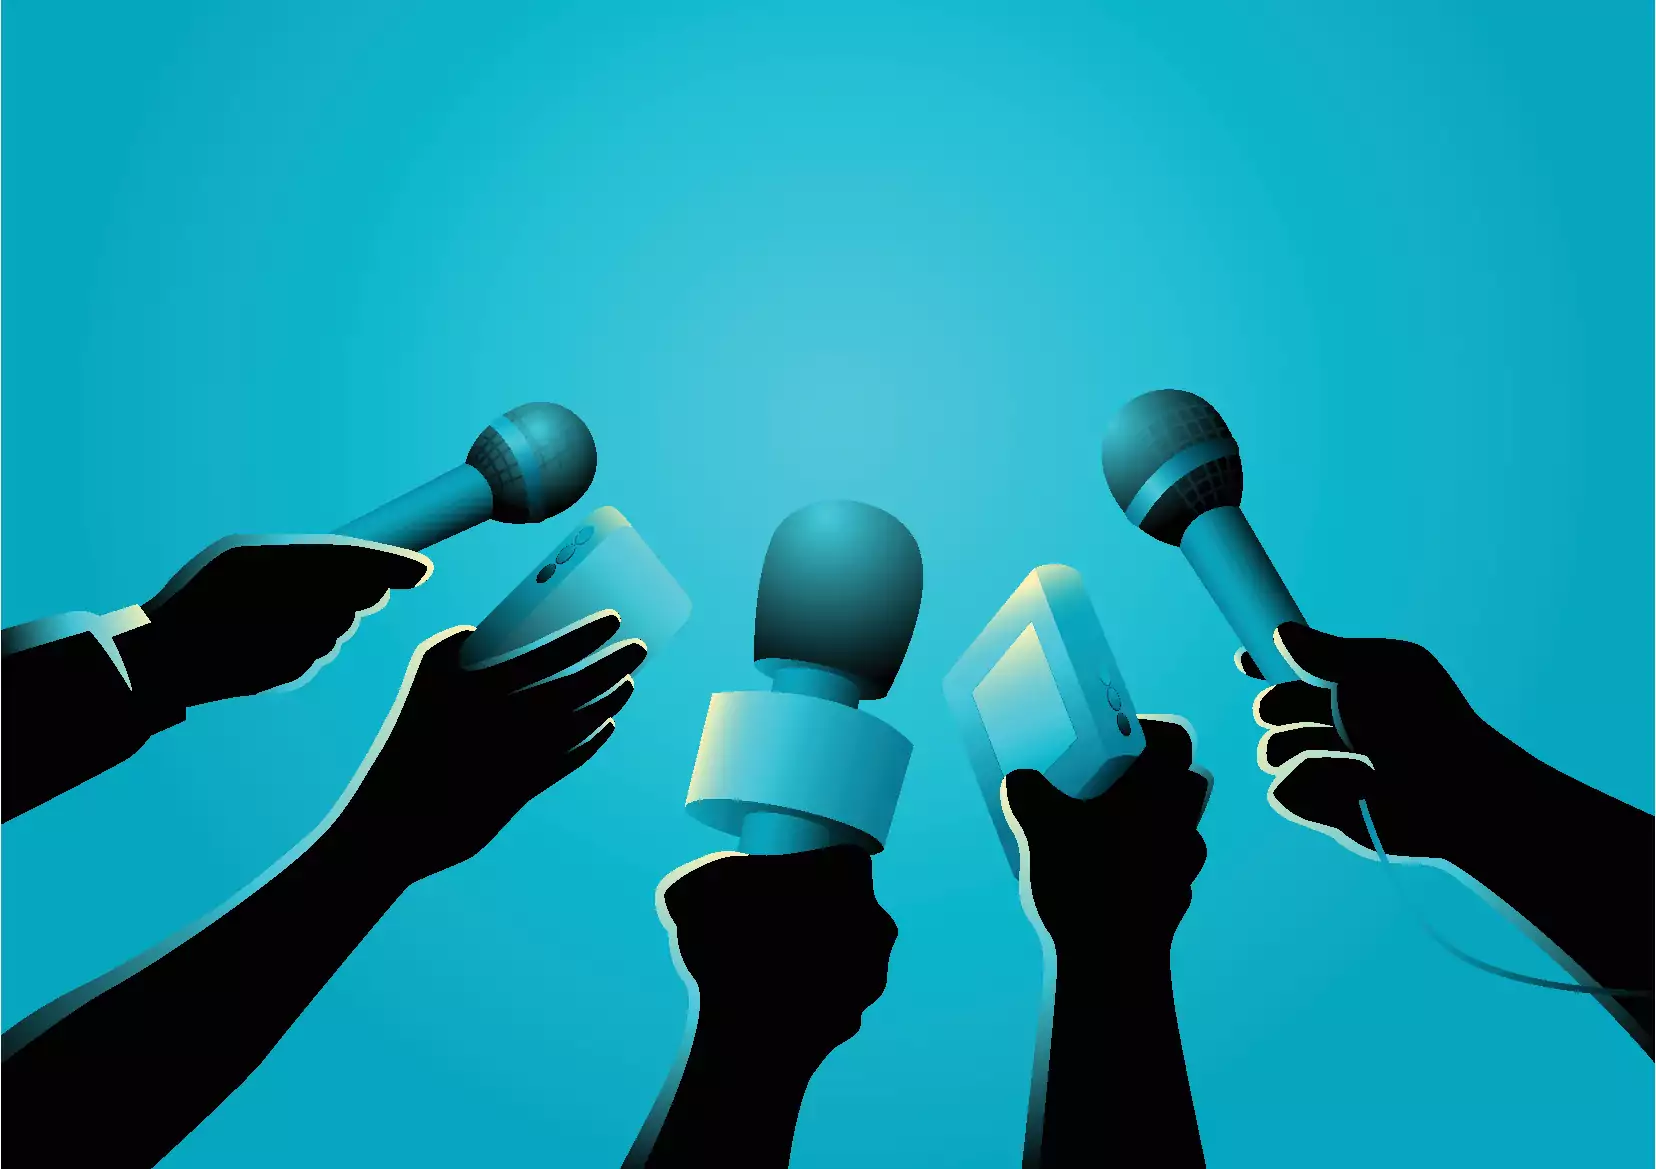 Graphic of hands holding up microphones meant to represent reporters getting the scoop.